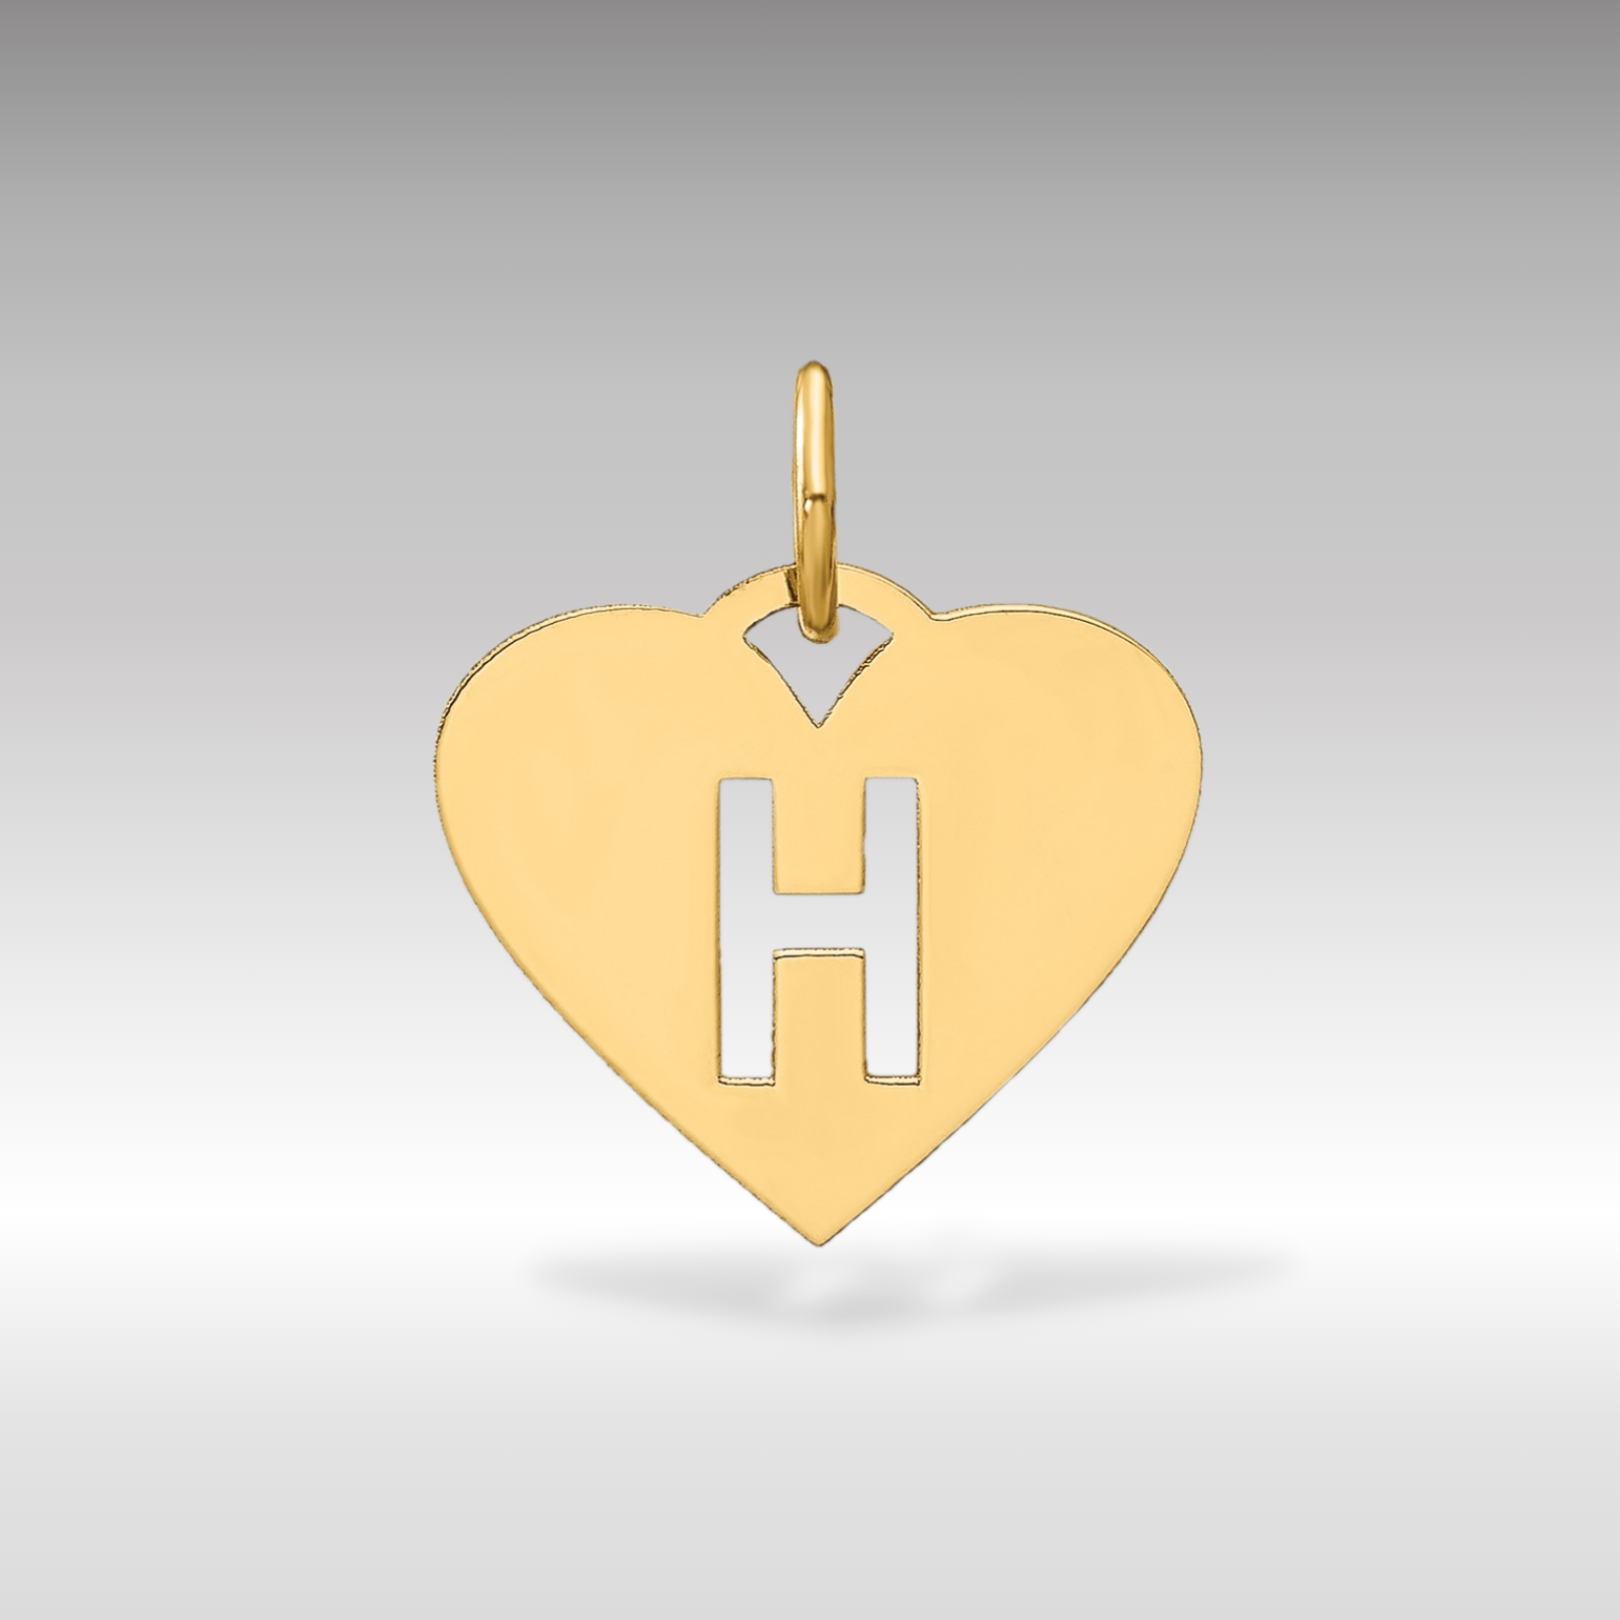 14K Gold Heart Pendant with Letter 'H' - Charlie & Co. Jewelry